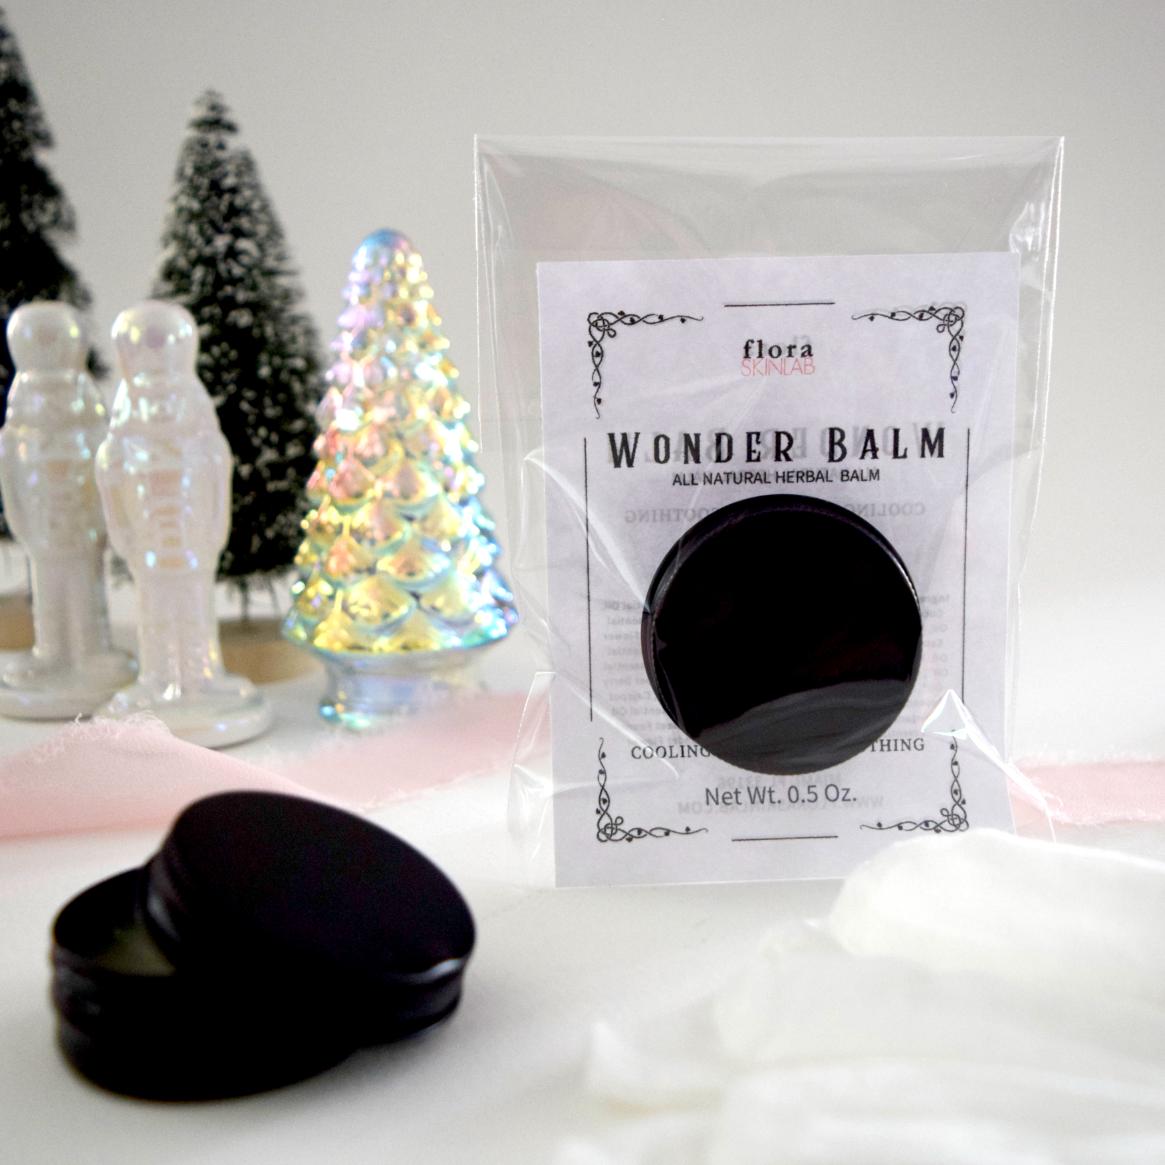 Wonderbalm: All-Natural Herbal Balm for Deep Hydration